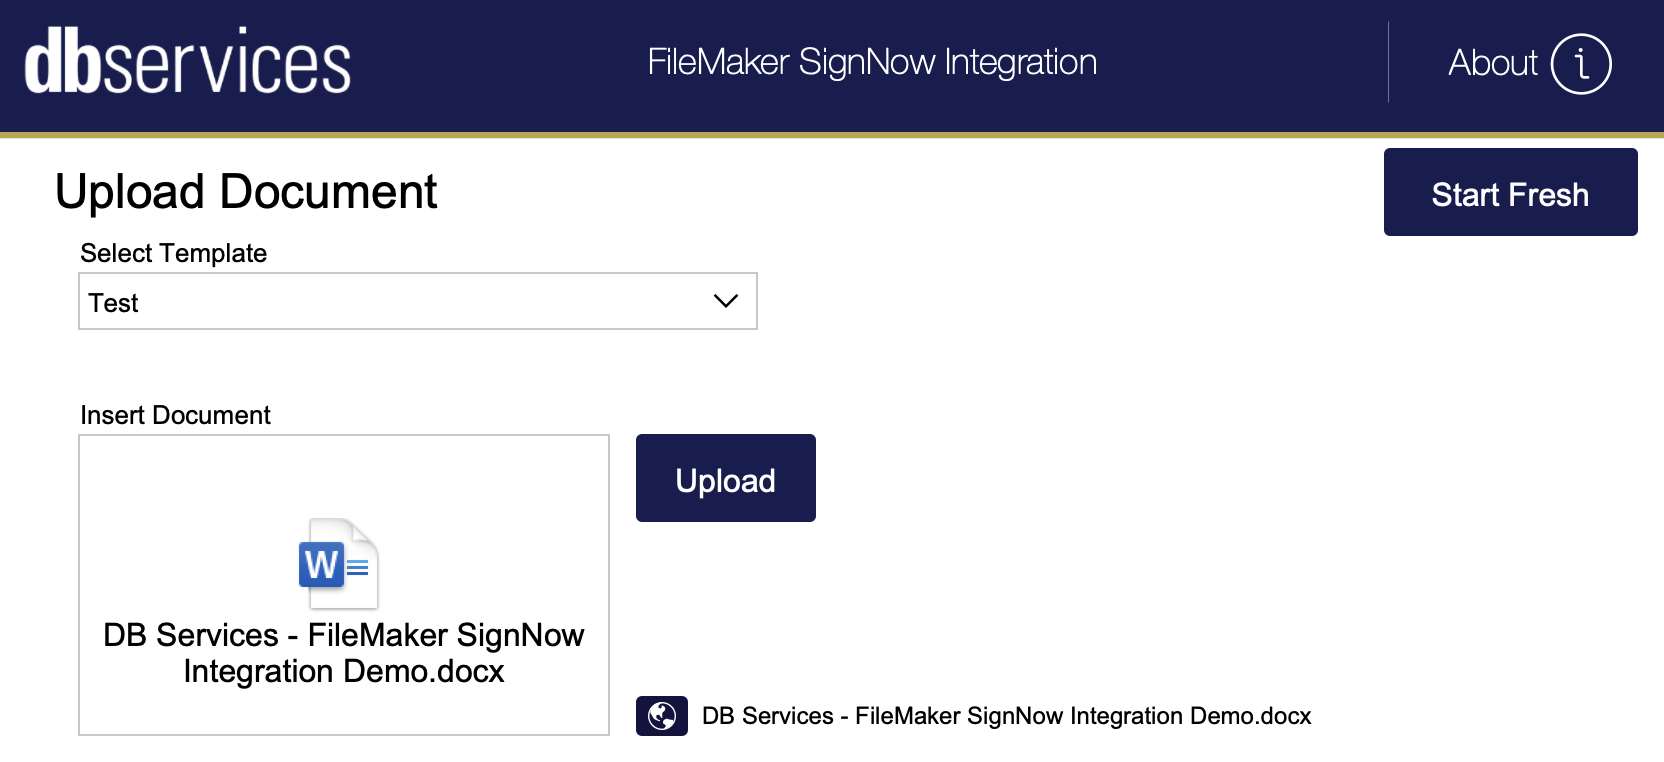 filemaker signnow integration Document Uploaded with Link